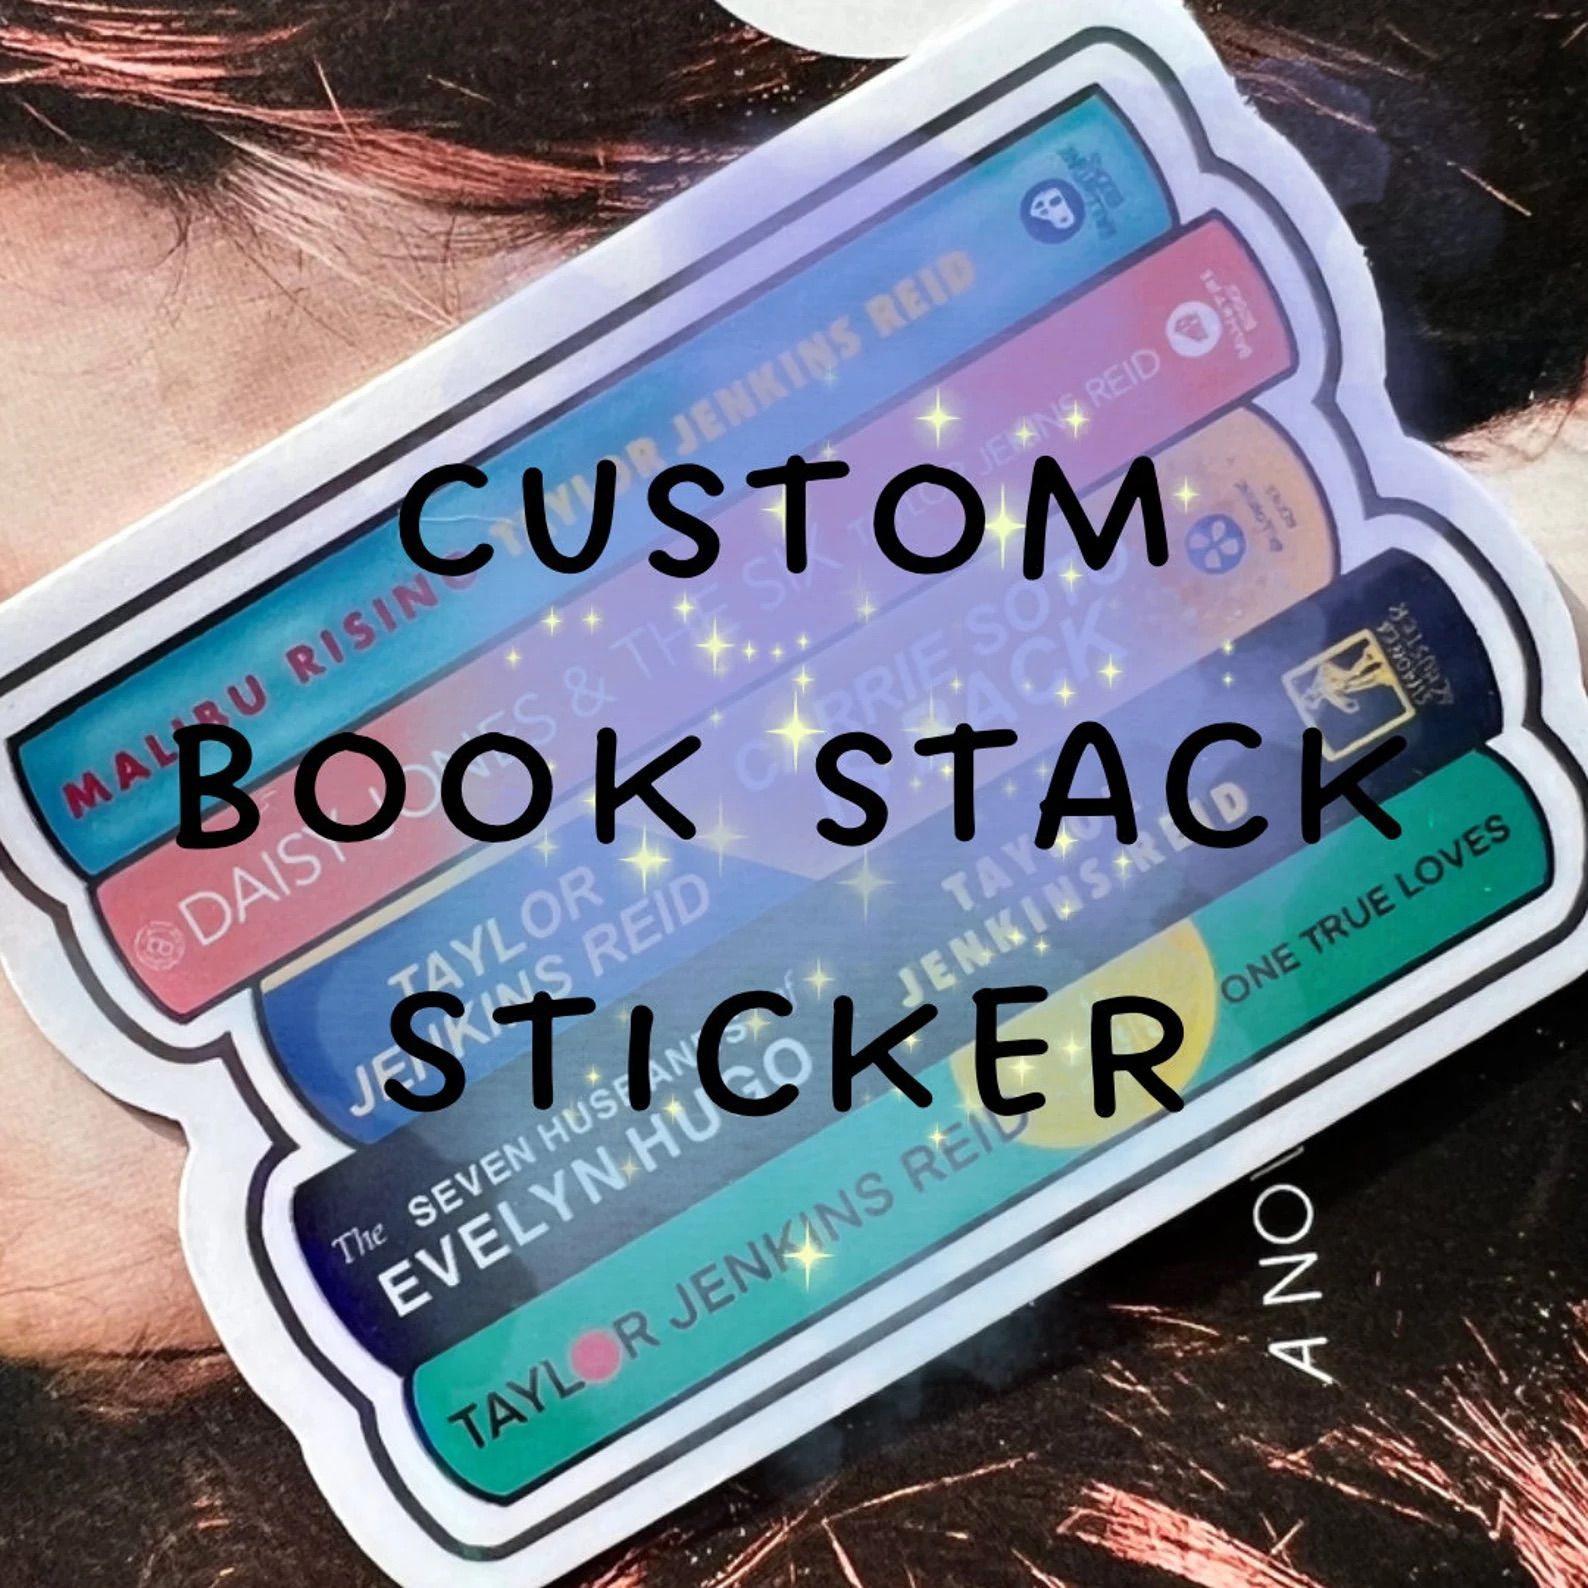 Custom Book Stack Sticker in front of a book cover.